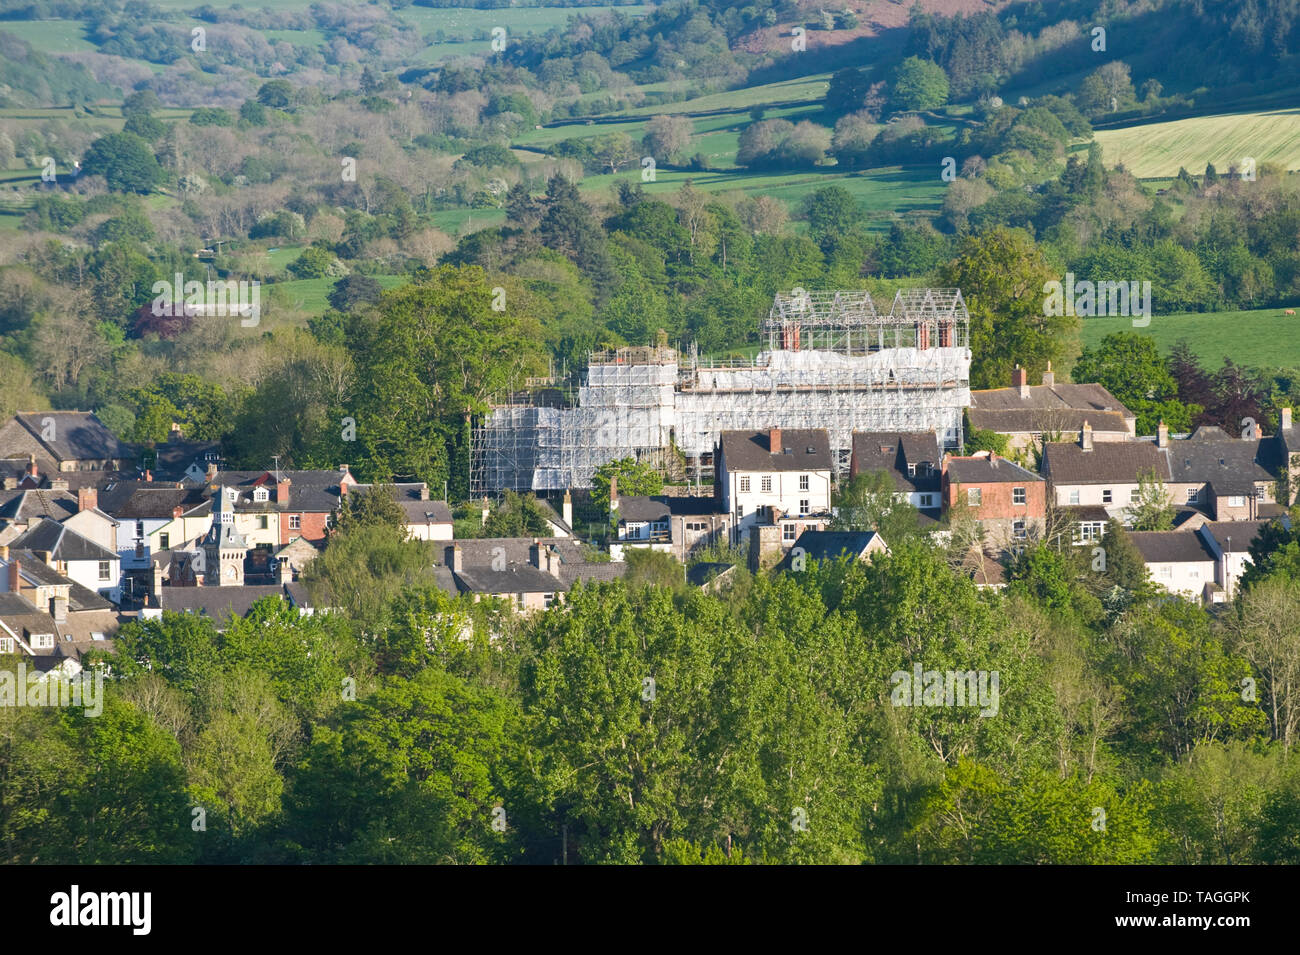 View over the town of Hay on Wye Powys Wales UK Jacobean Hay Castle shrouded in scaffolding during renovation to this historic building funded by a grant of £5m from National Lottery Heritage Fund Stock Photo